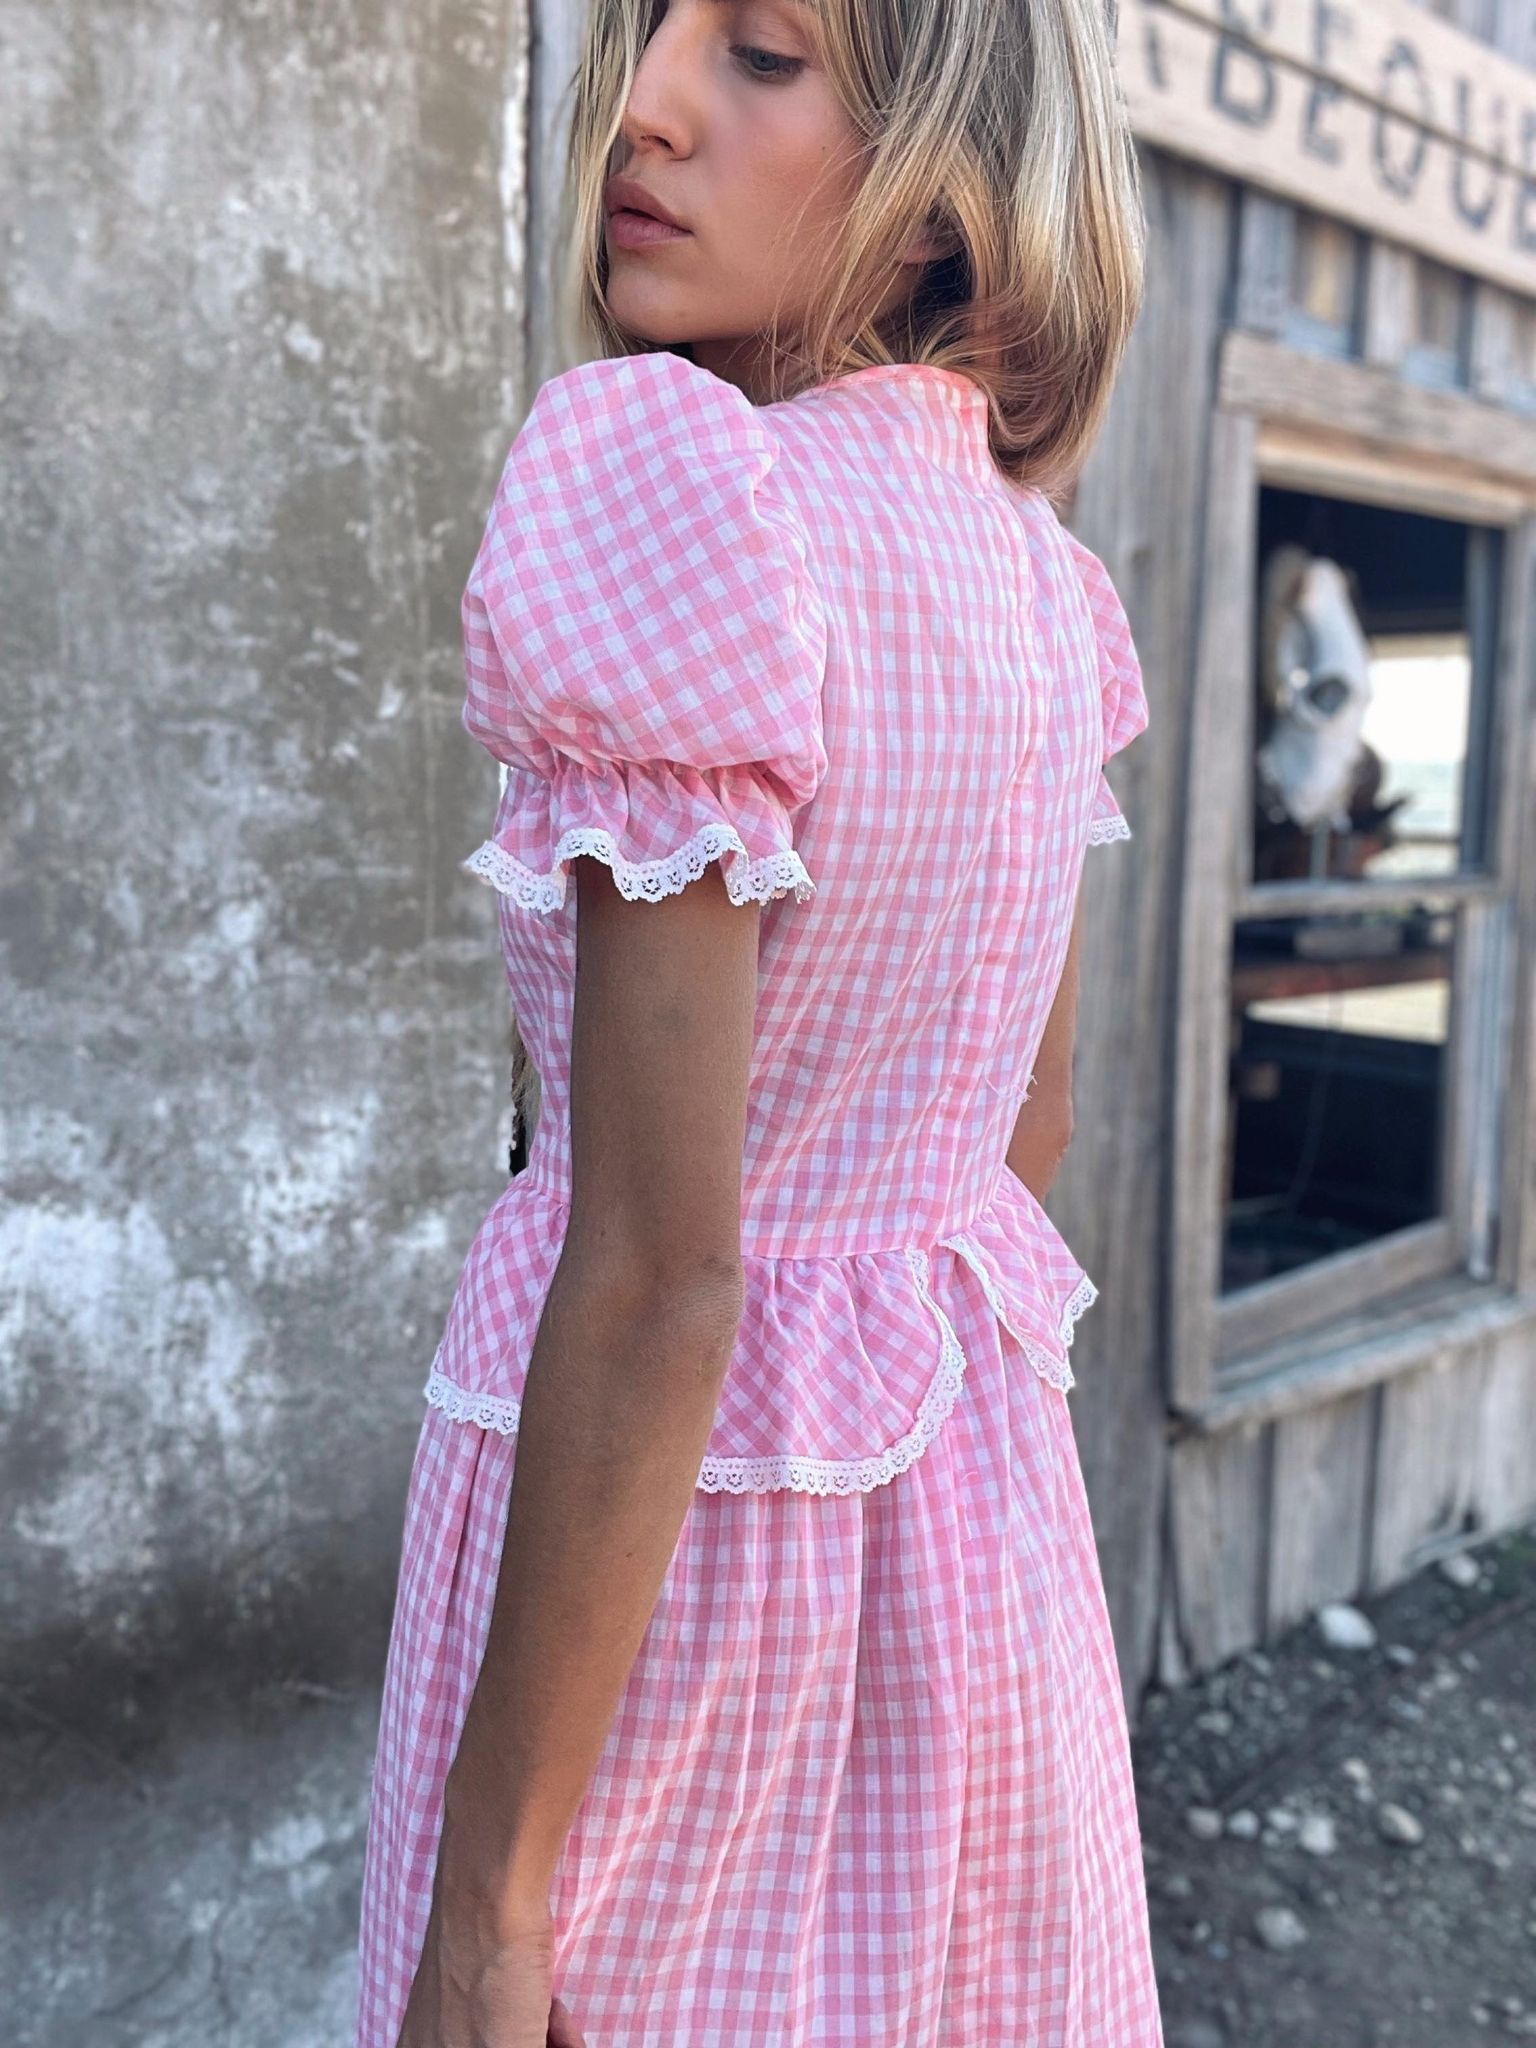 Gingham Dress from the 1960's